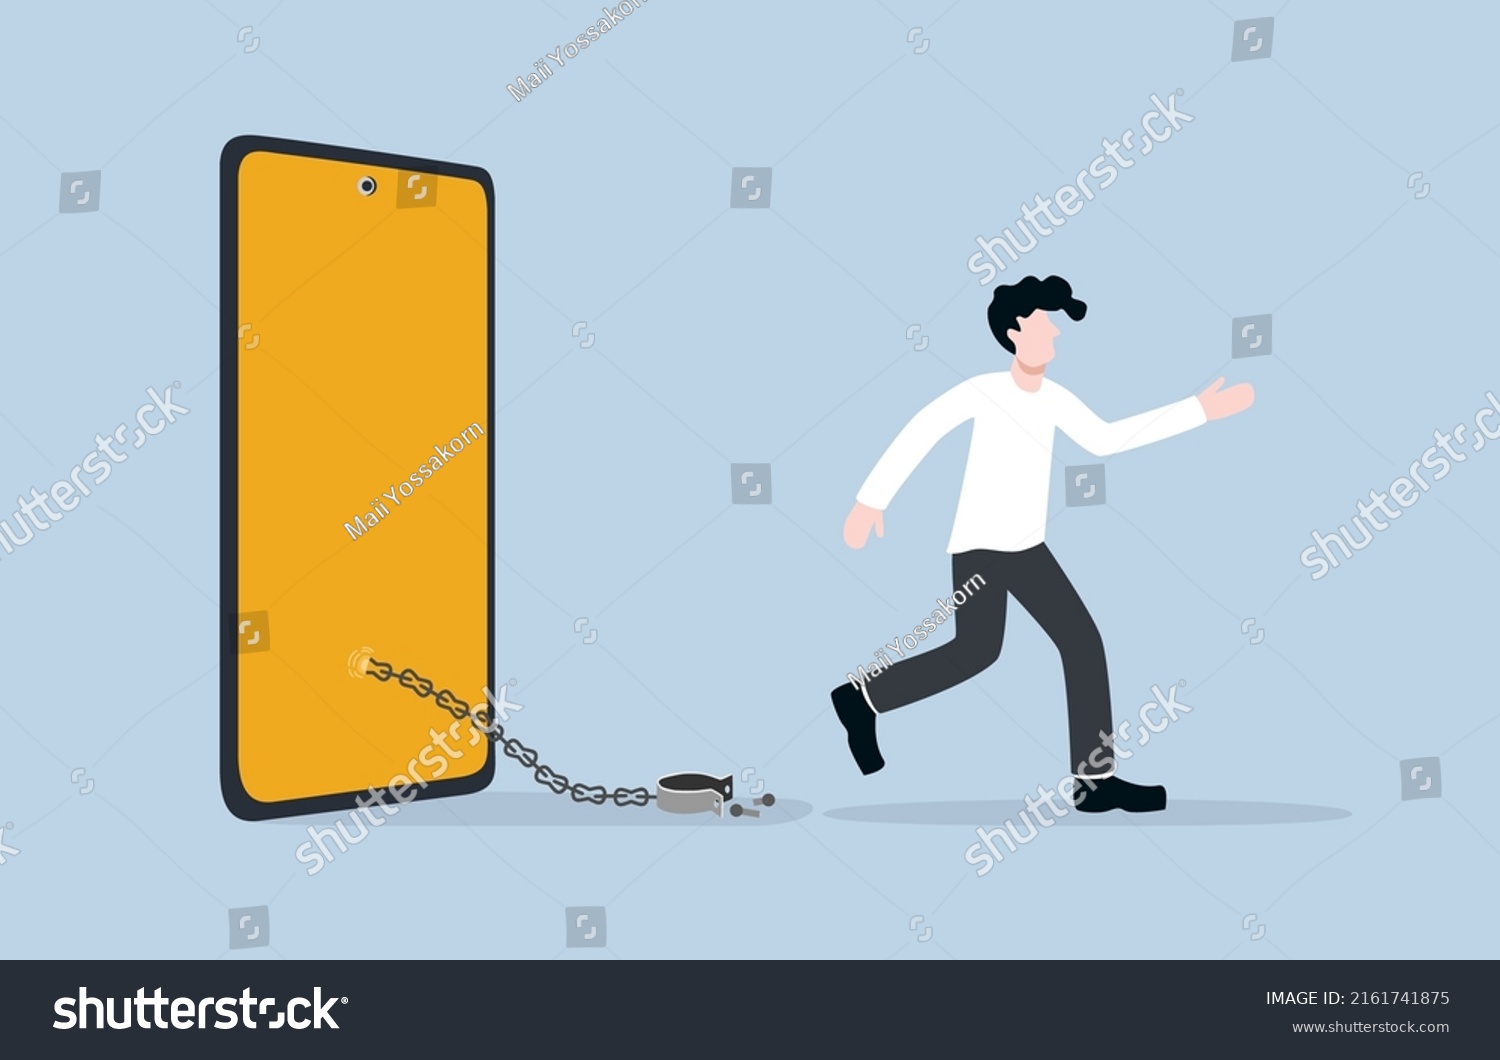 SVG of Reducing screen time for better health, balancing between virtual life and social life for wellbeing, overcoming social media addiction concept. Man stepping out of mobile phone after unlocking chain. svg